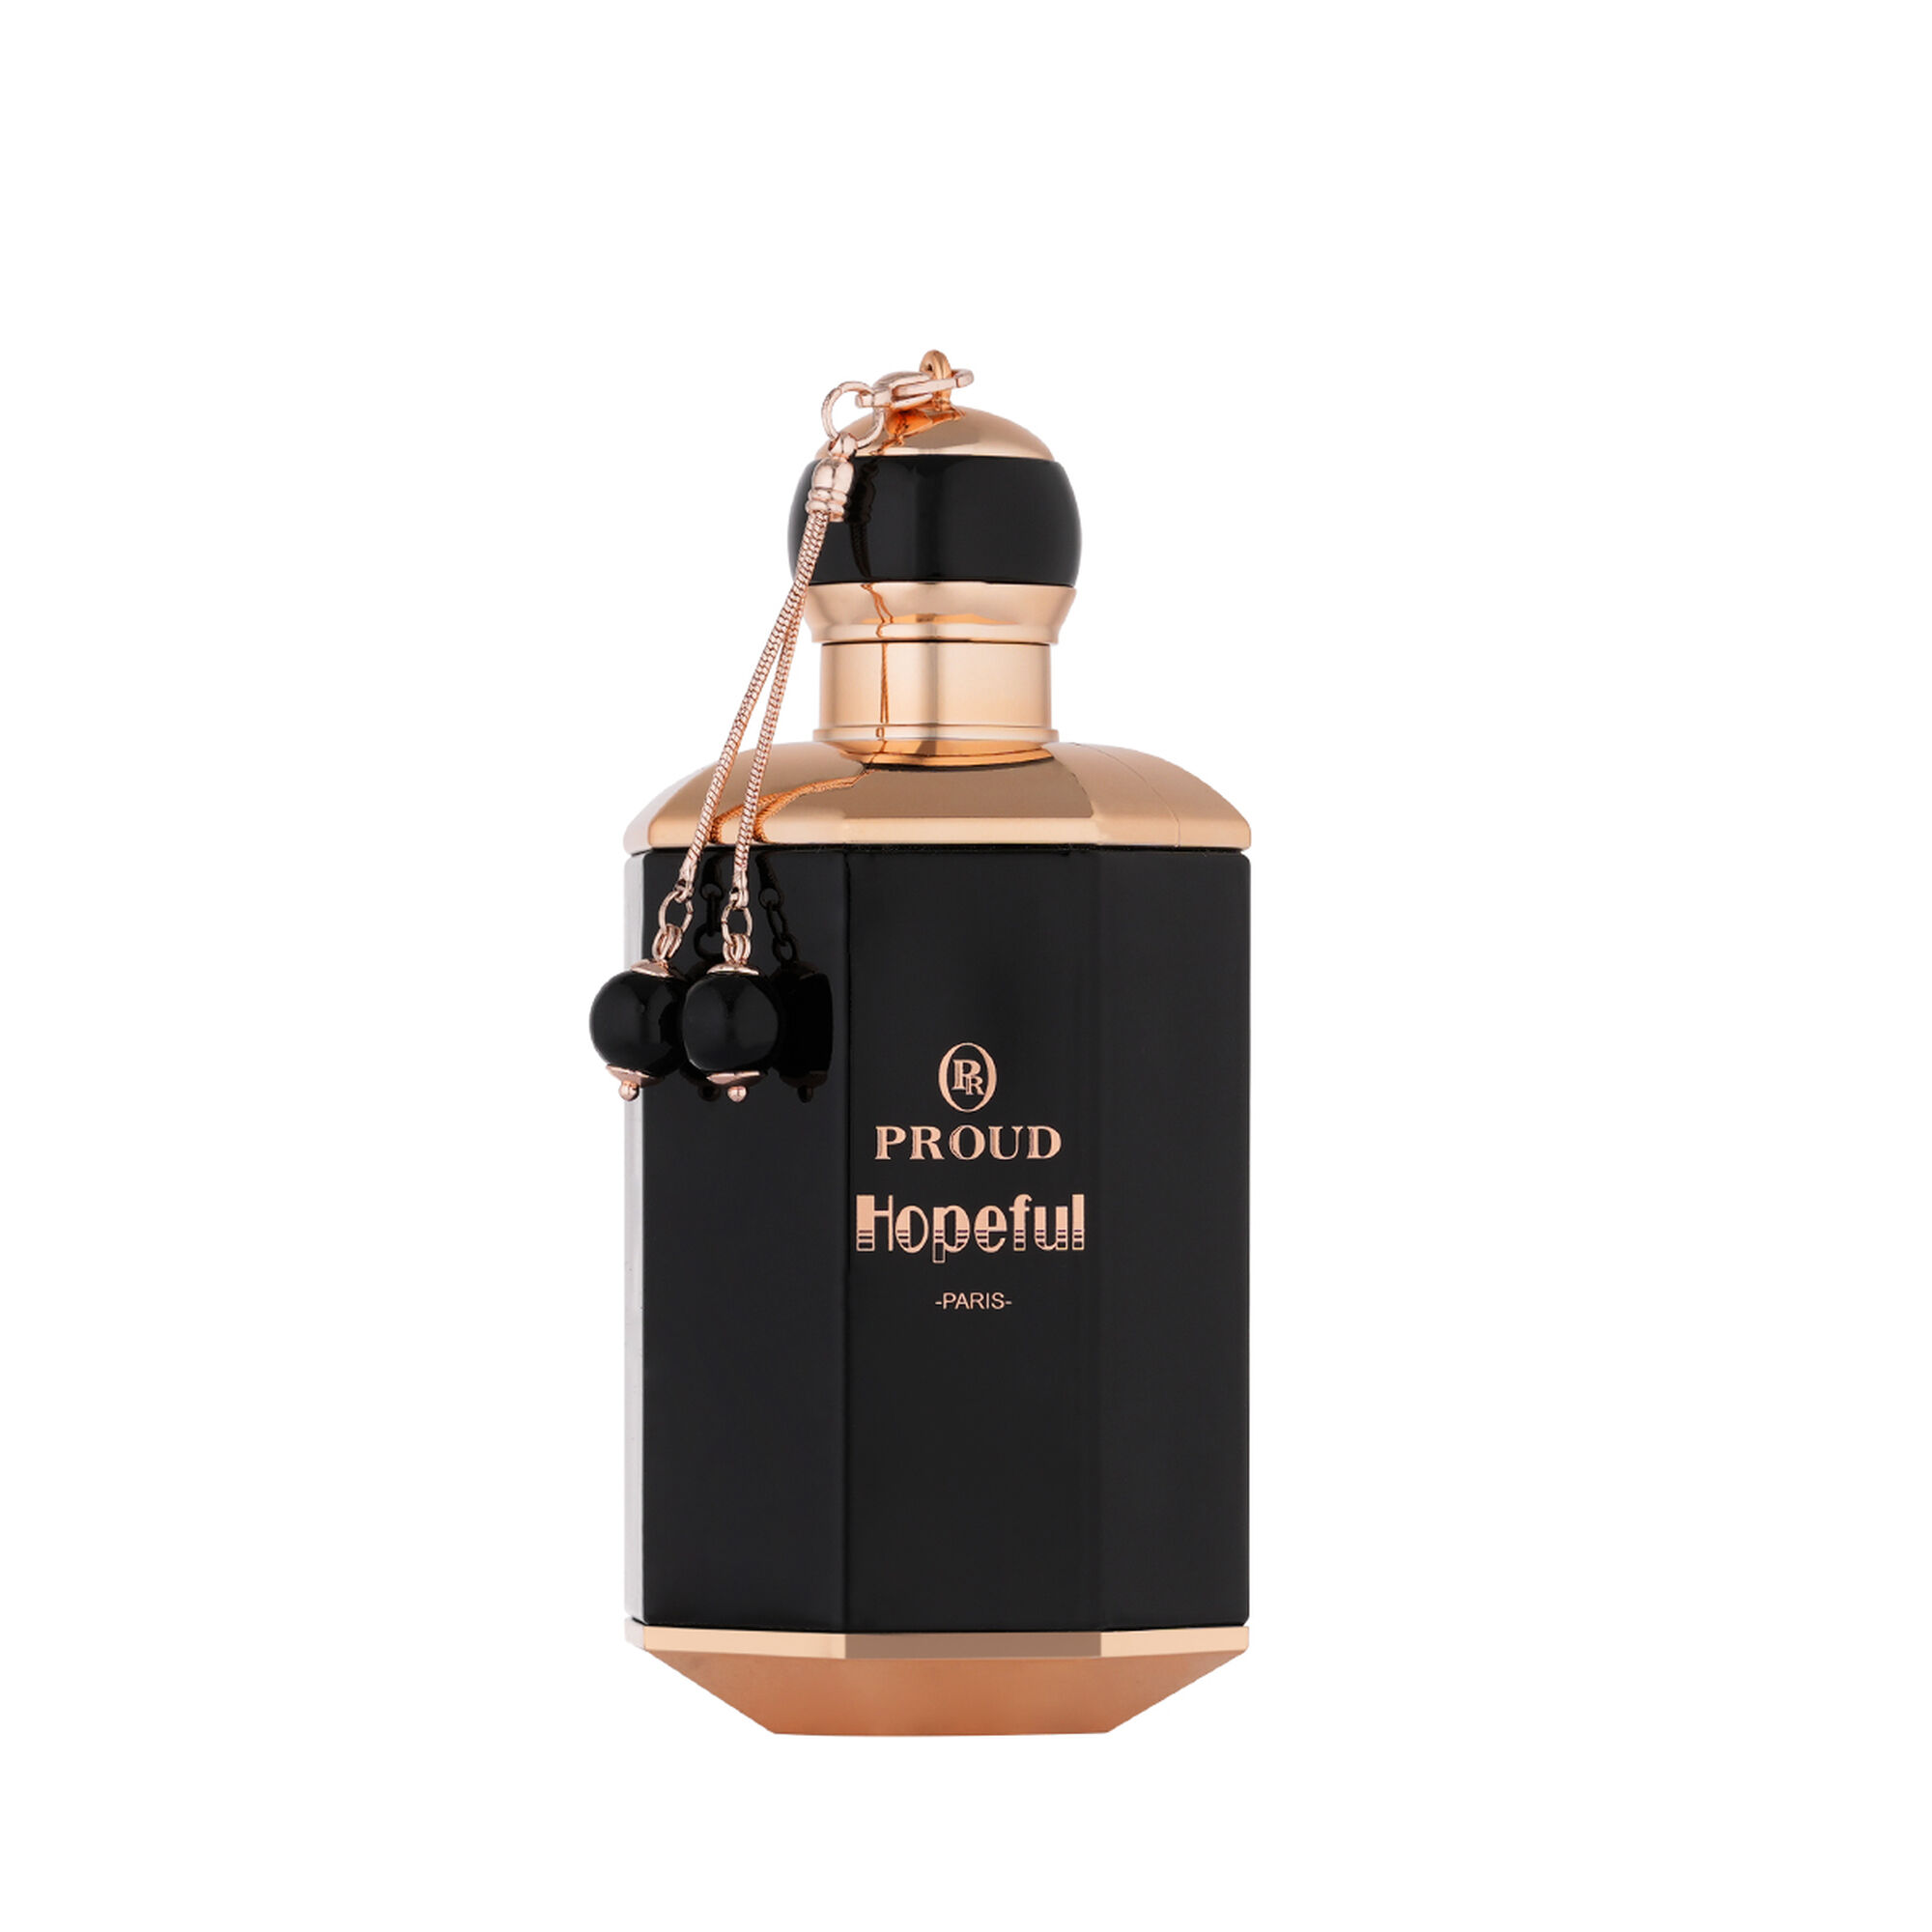 Hopeful Perfume for Men by Proud